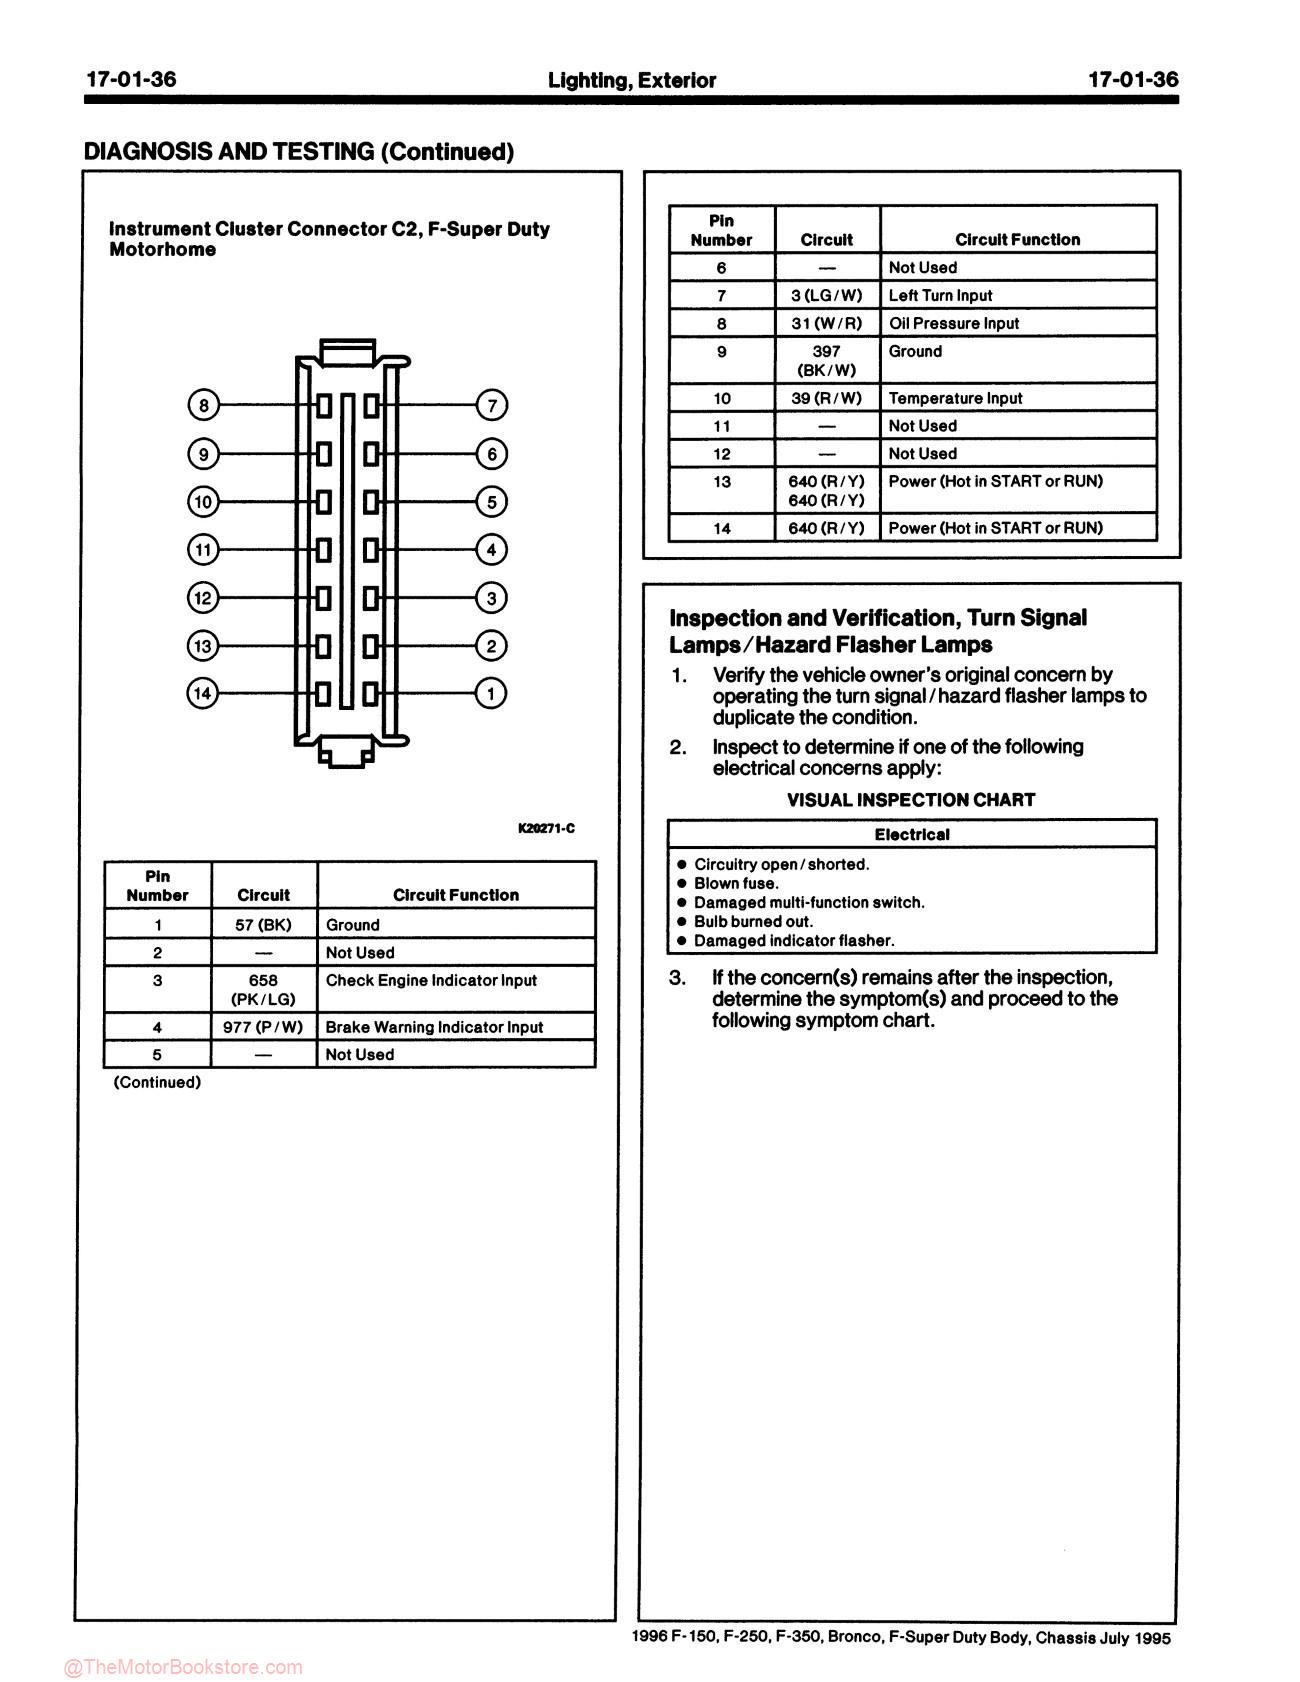 1996 Ford F-150 / F-250 / F-350 Truck, Bronco Service Manual - Sample Page 2